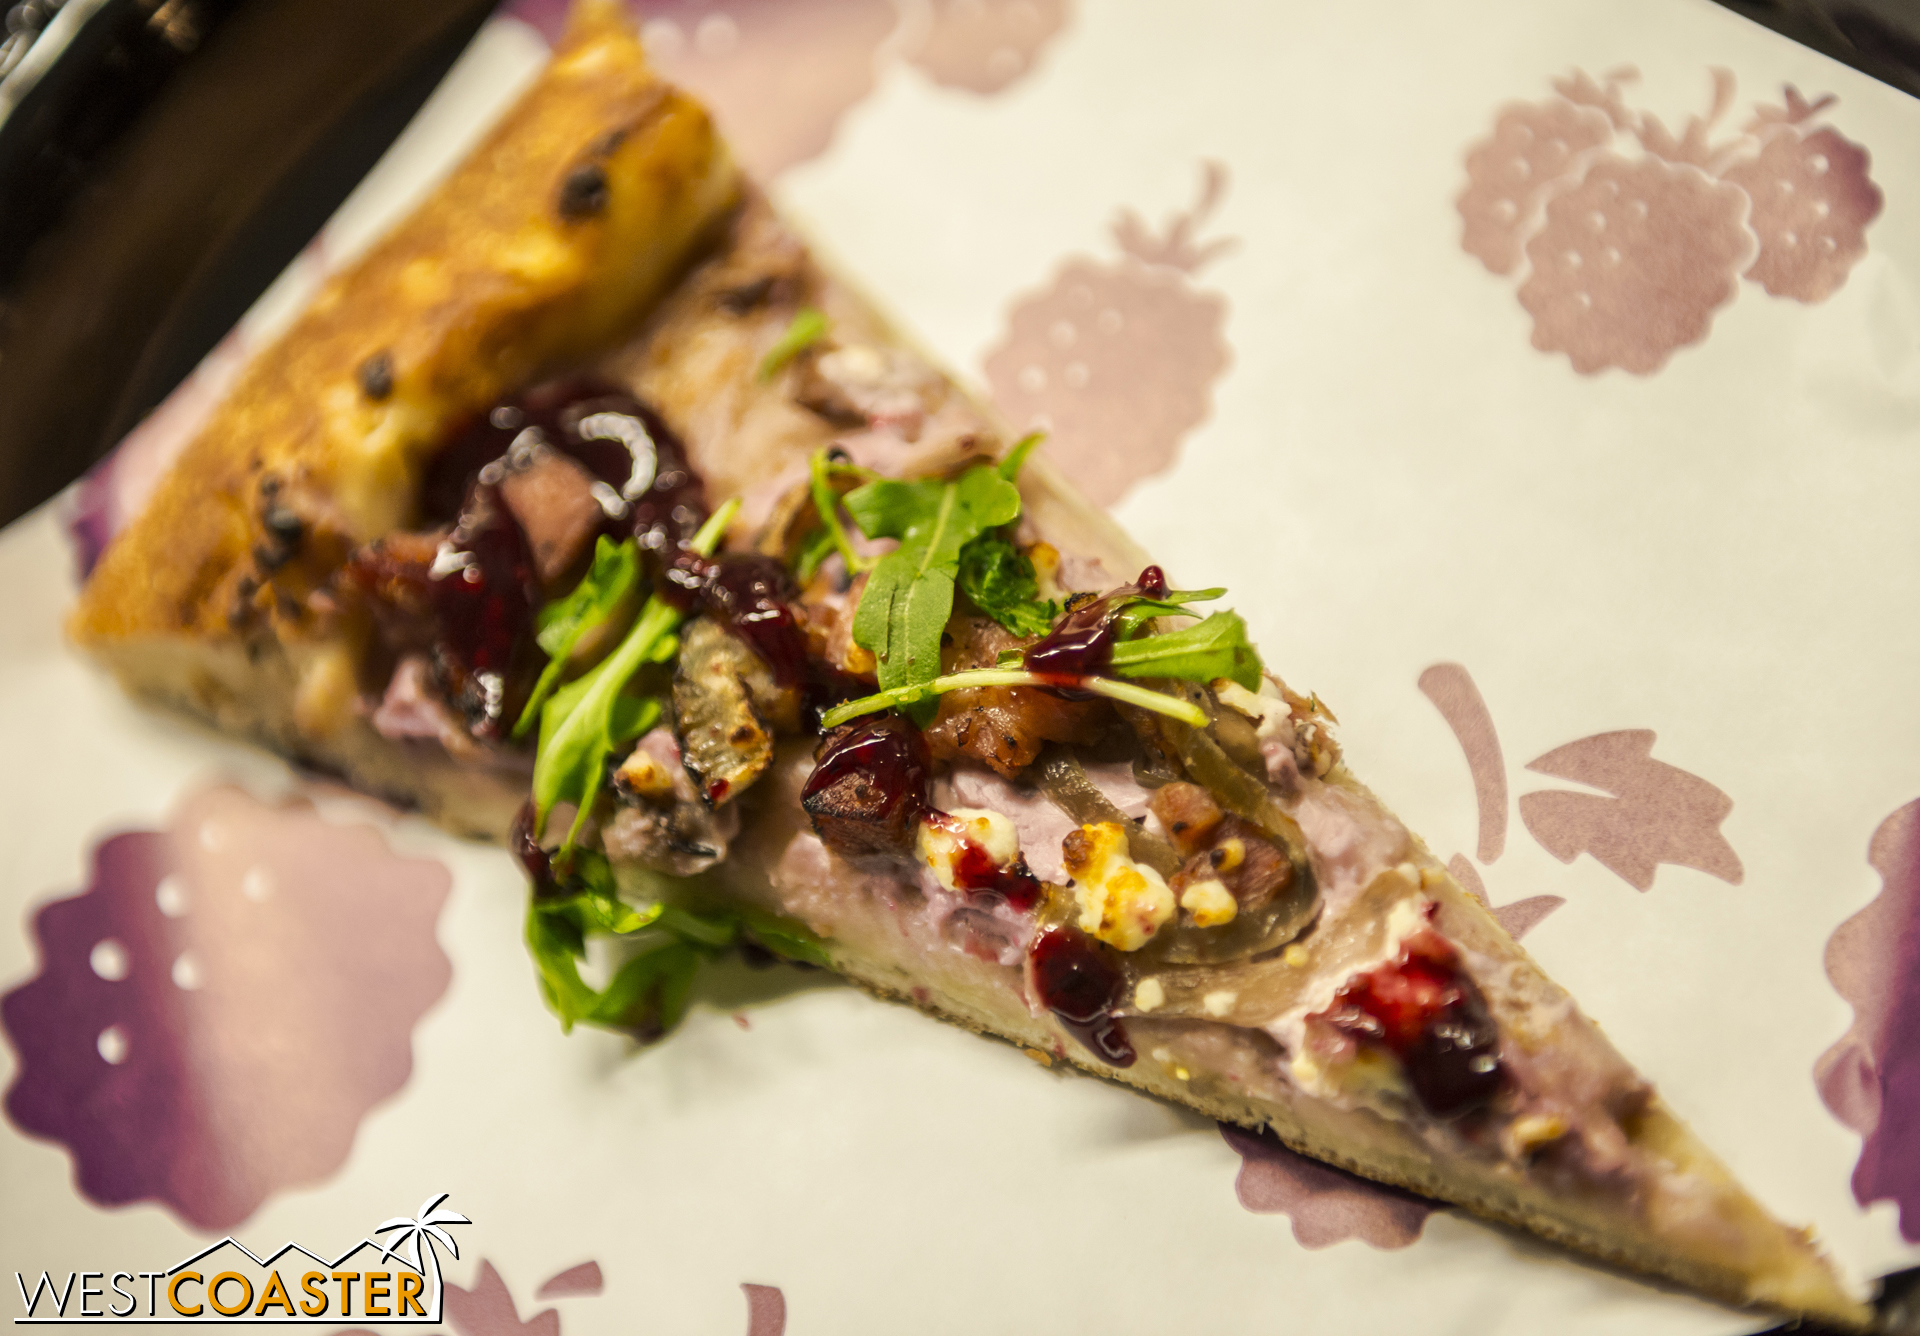  The last tasting card item and new for this year... Boysenberry Pizza.&nbsp; With goat cheese, arugula, and bits of sausage, the flavor was great.&nbsp; I just wish it was served hot rather than lukewarm when I got it. 